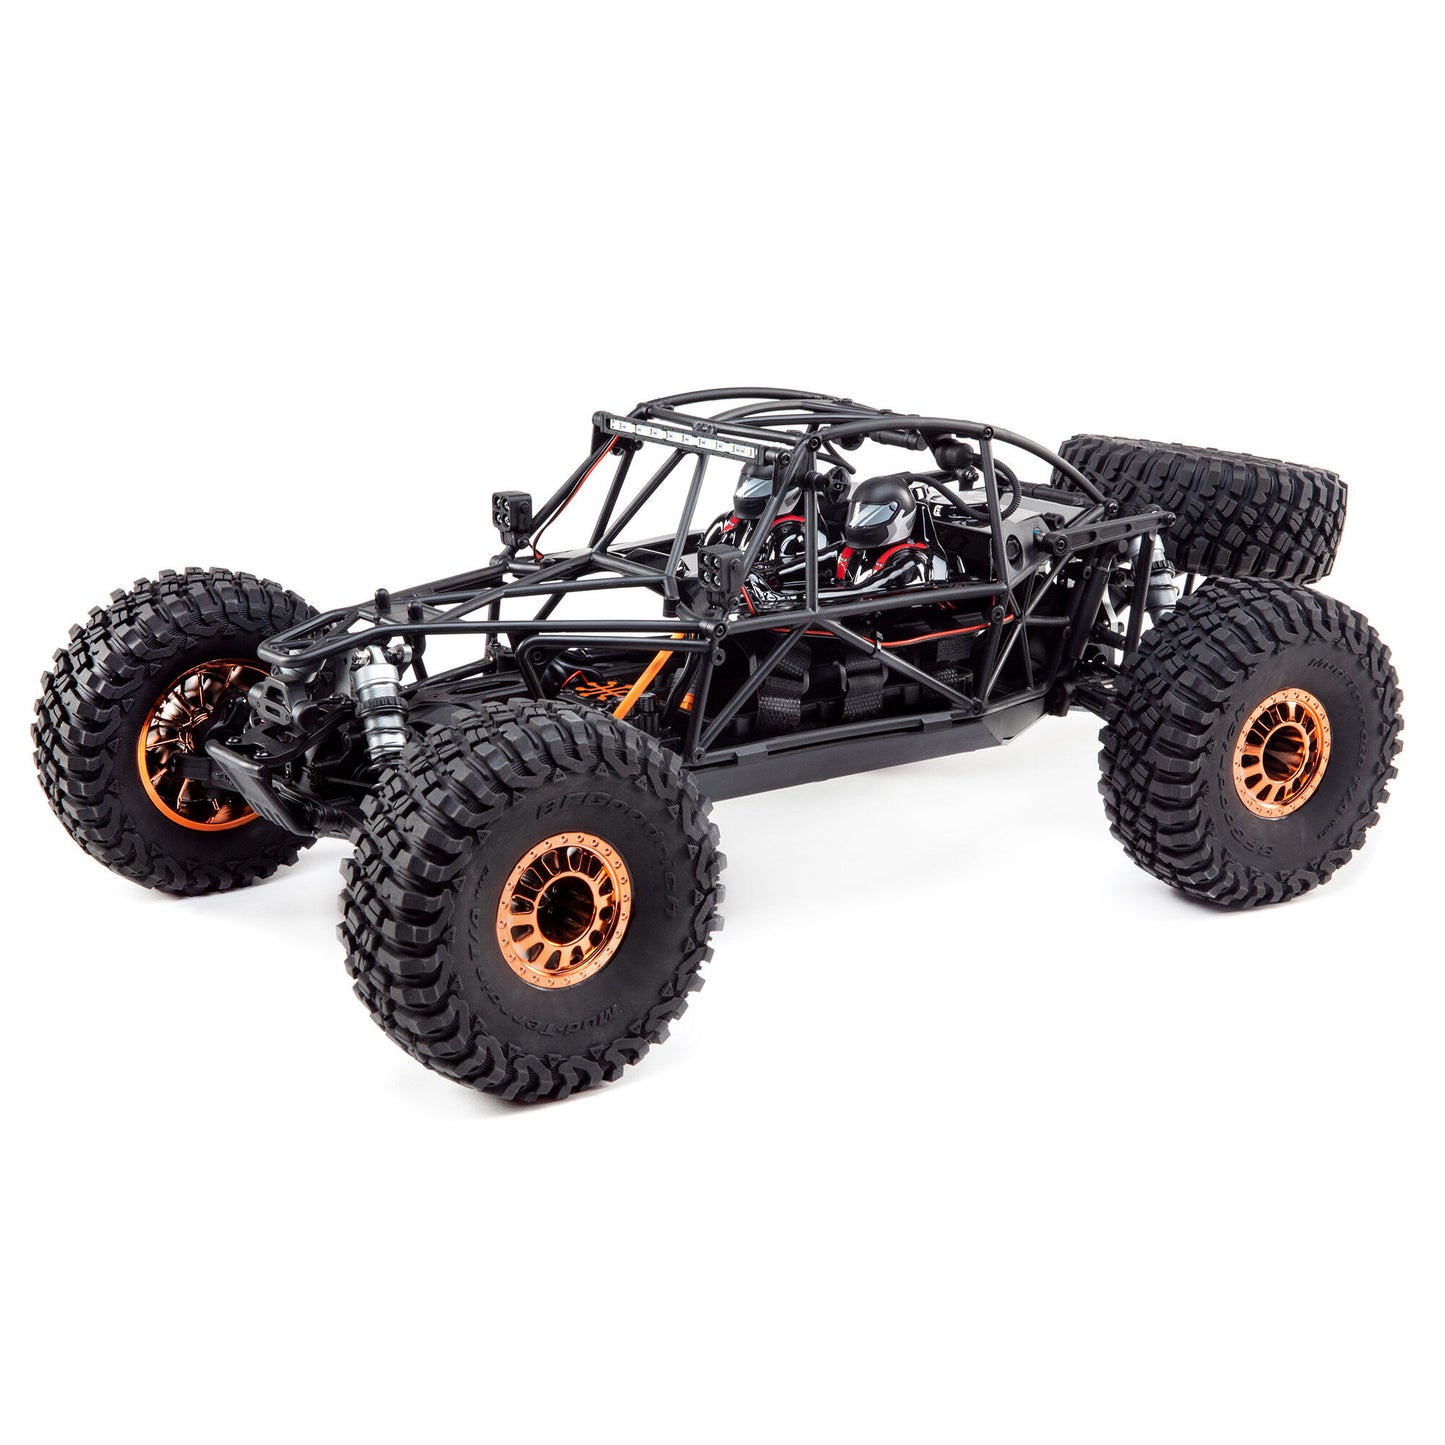 1/10 Lasernut U4 4WD Brushless RTR with Smart and AVC, Black